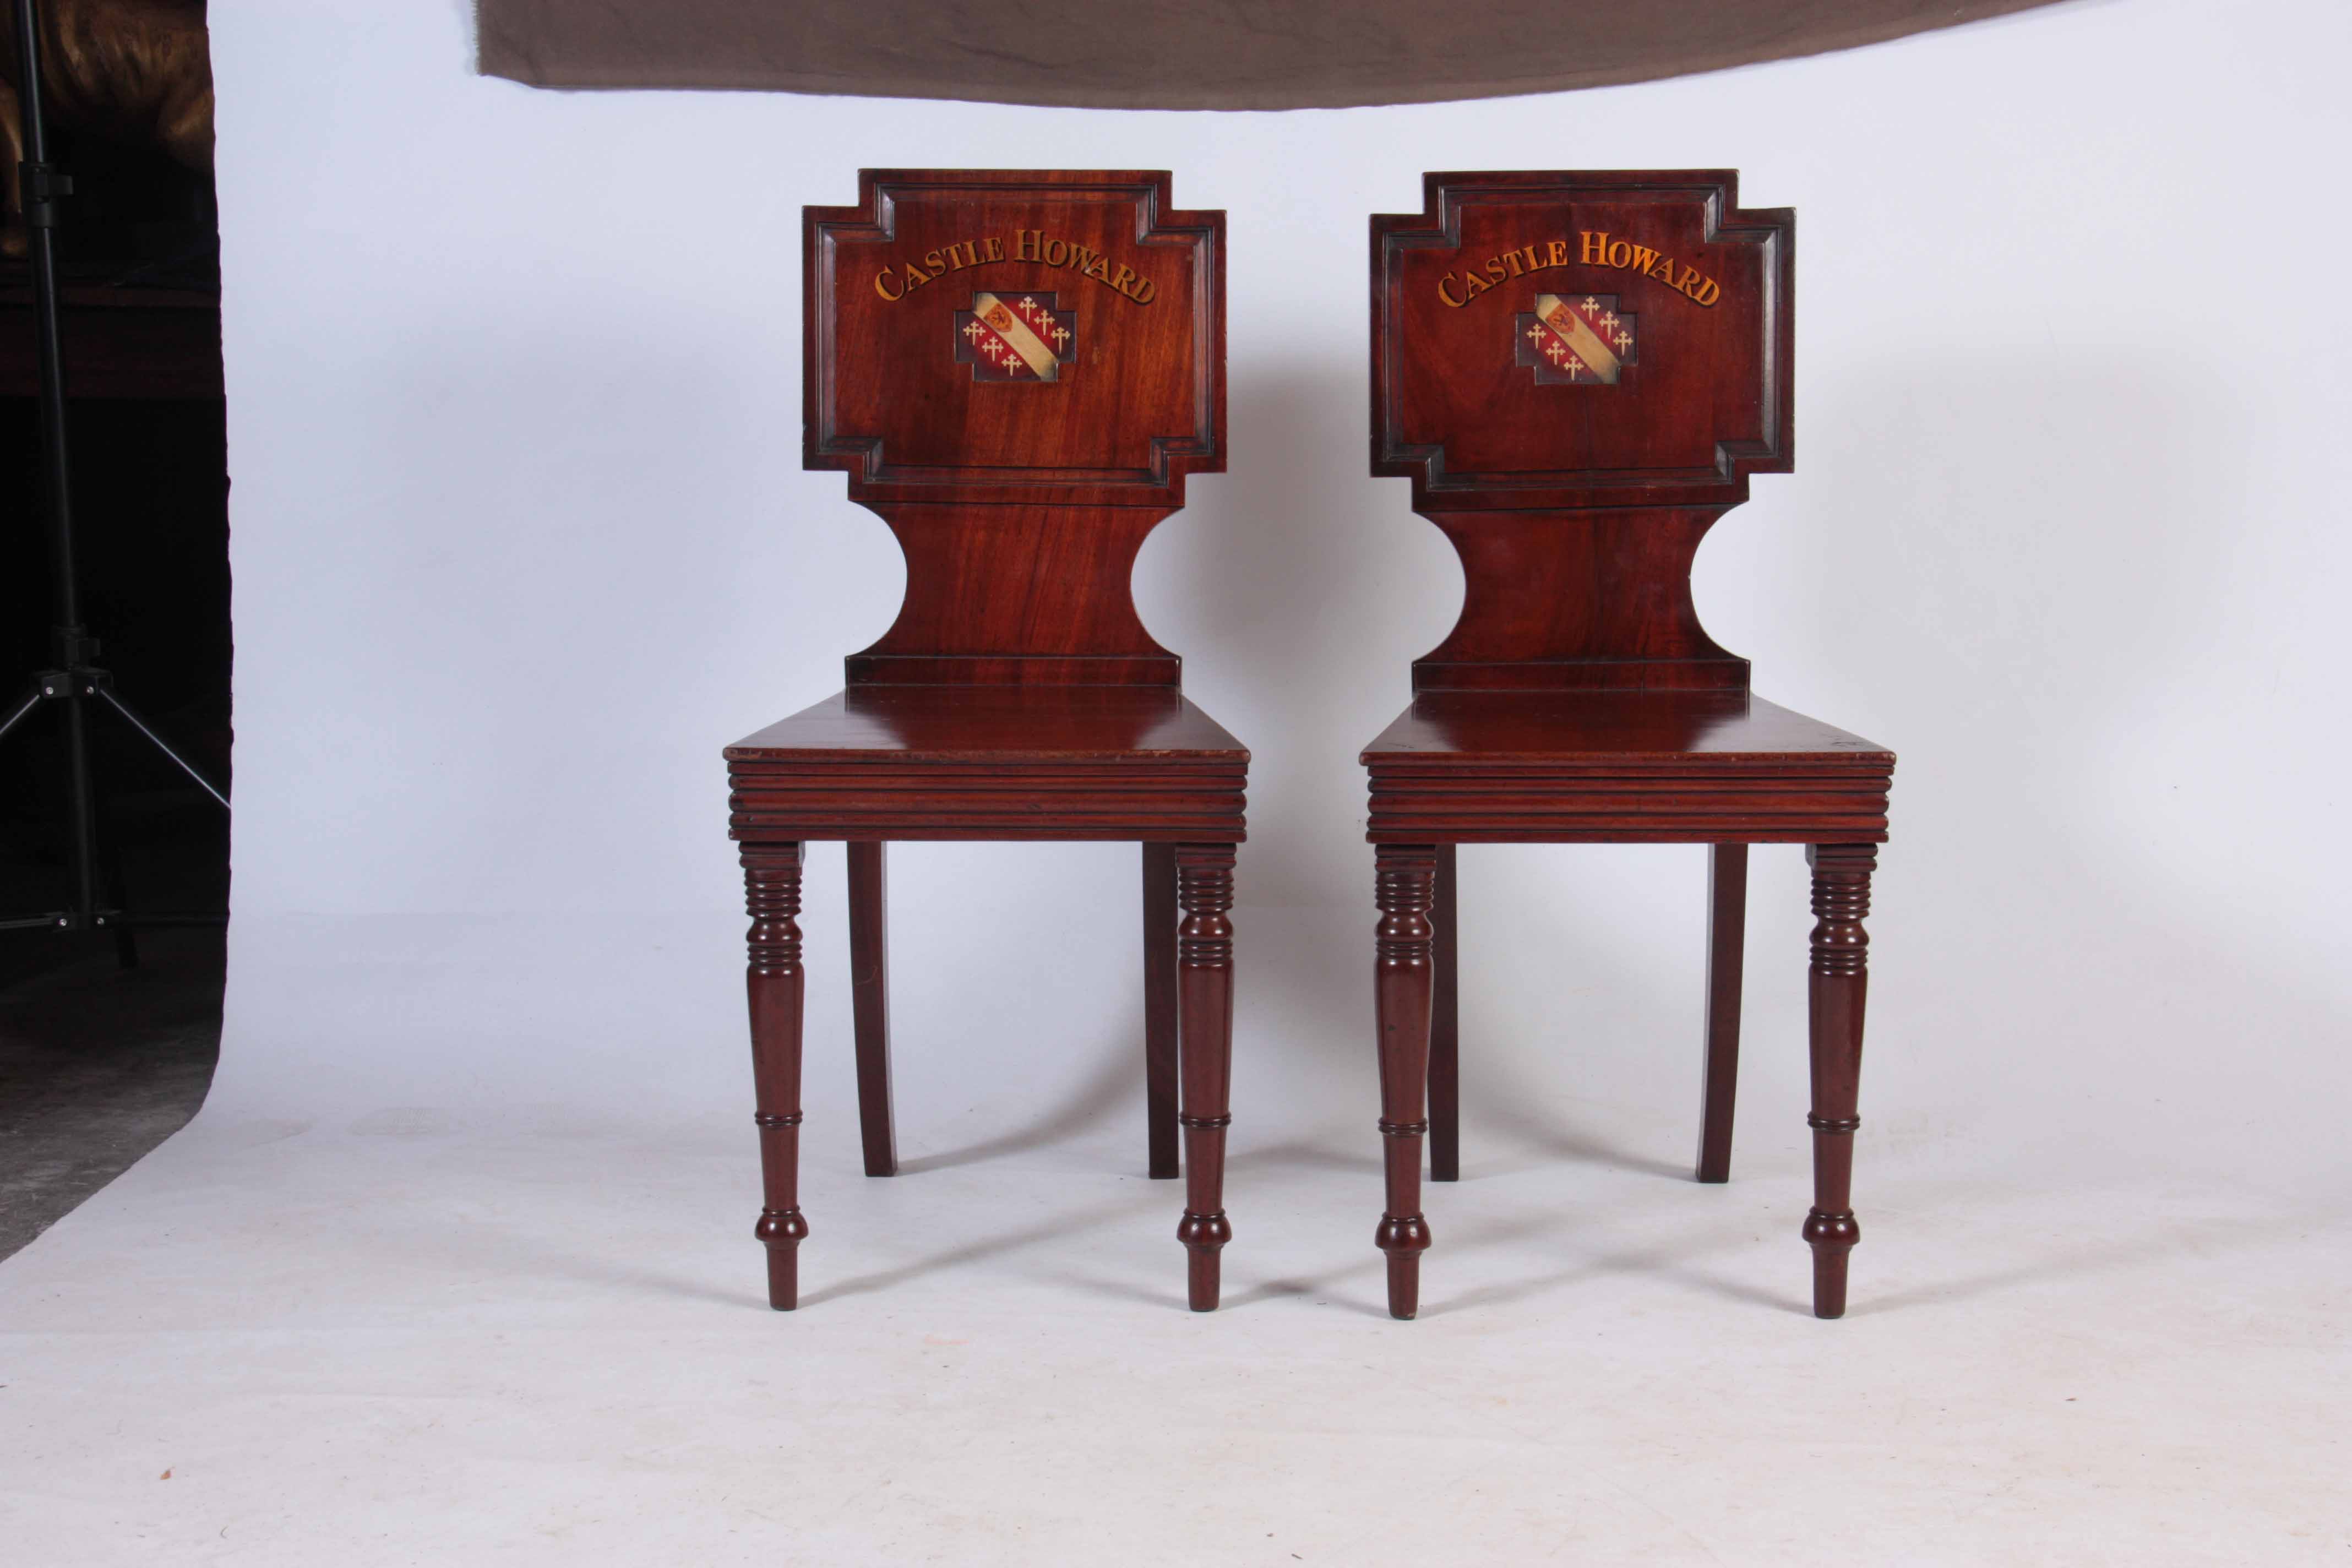 A PAIR OF LATE GEORGIAN MAHOGANY HALL CHAIRS with painted backs reading Castle Howard with coats - Image 9 of 9